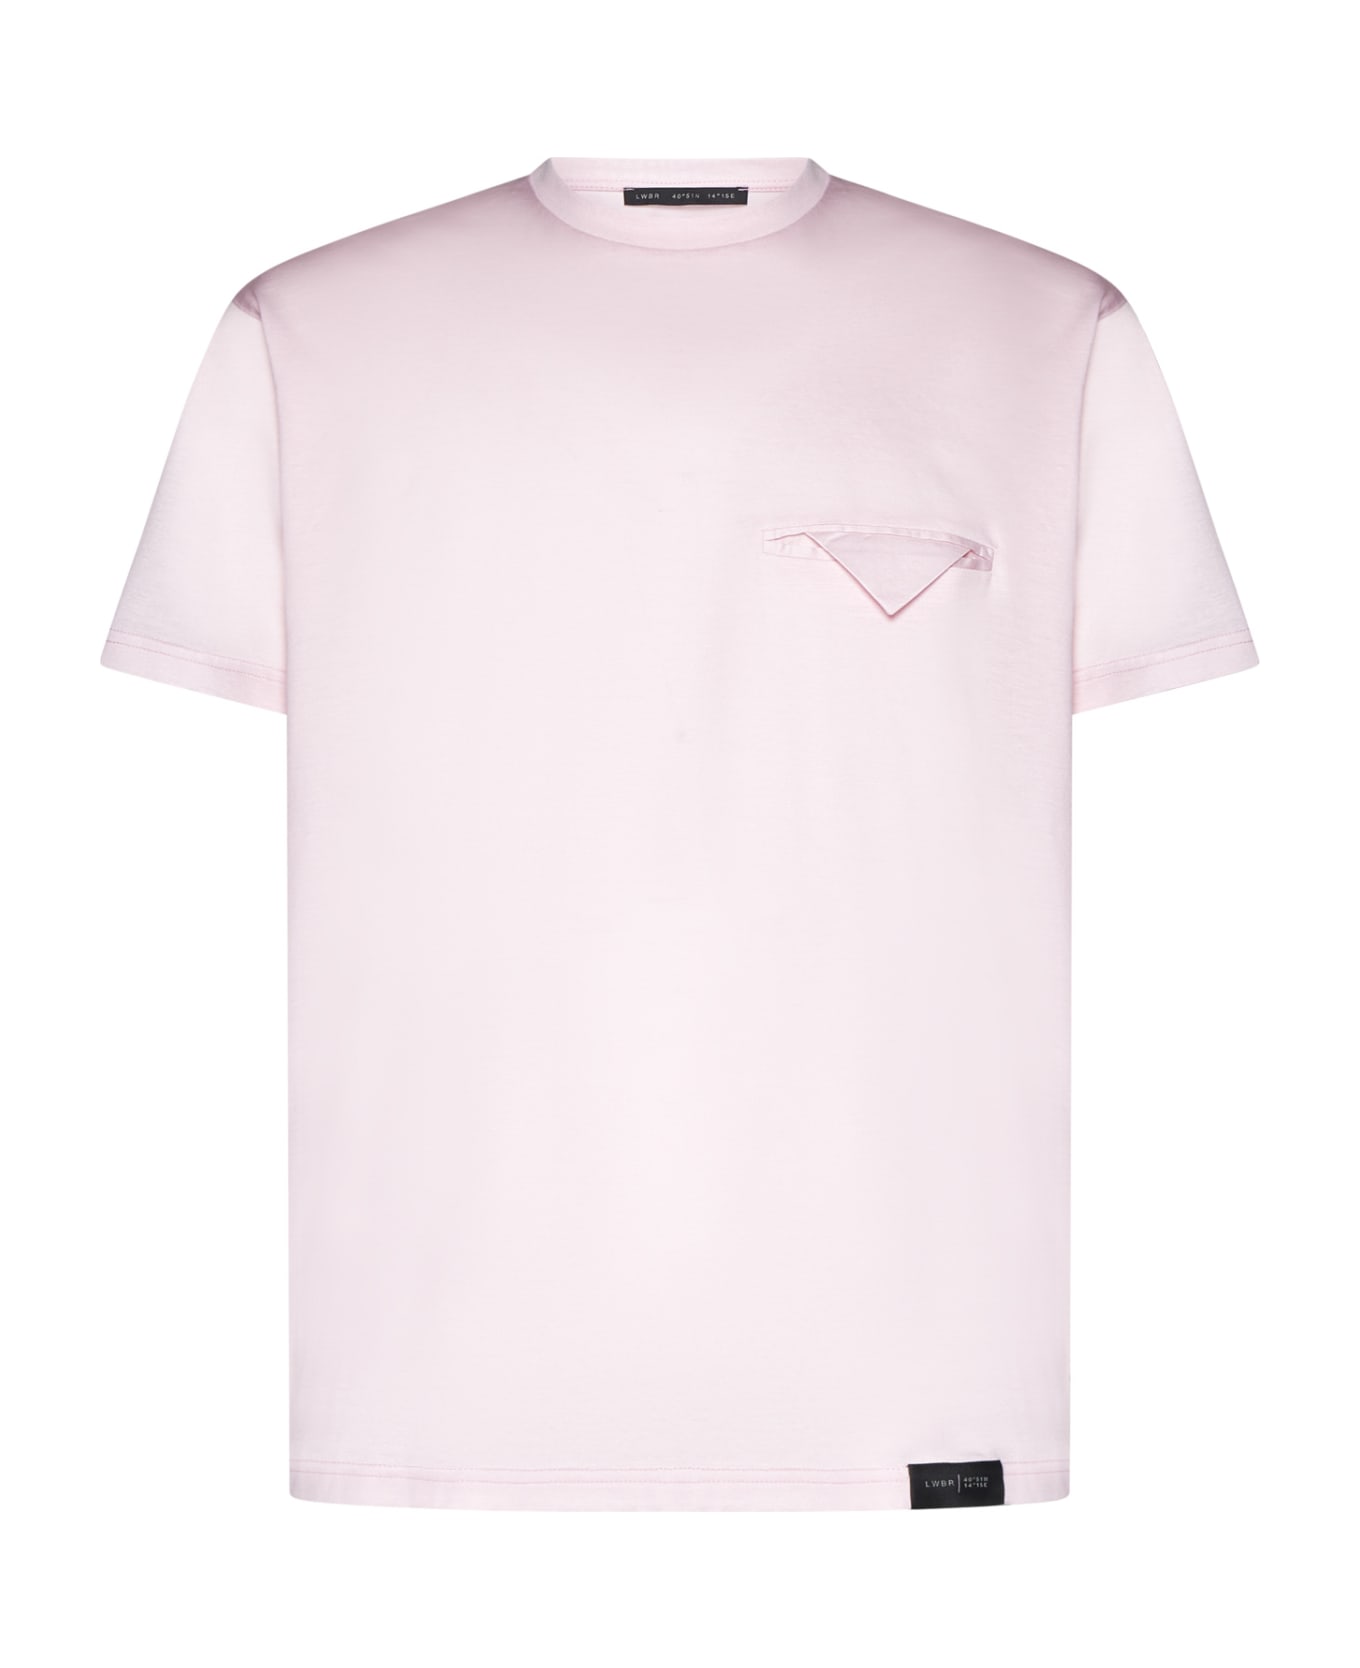 Low Brand T-Shirt - Pink シャツ